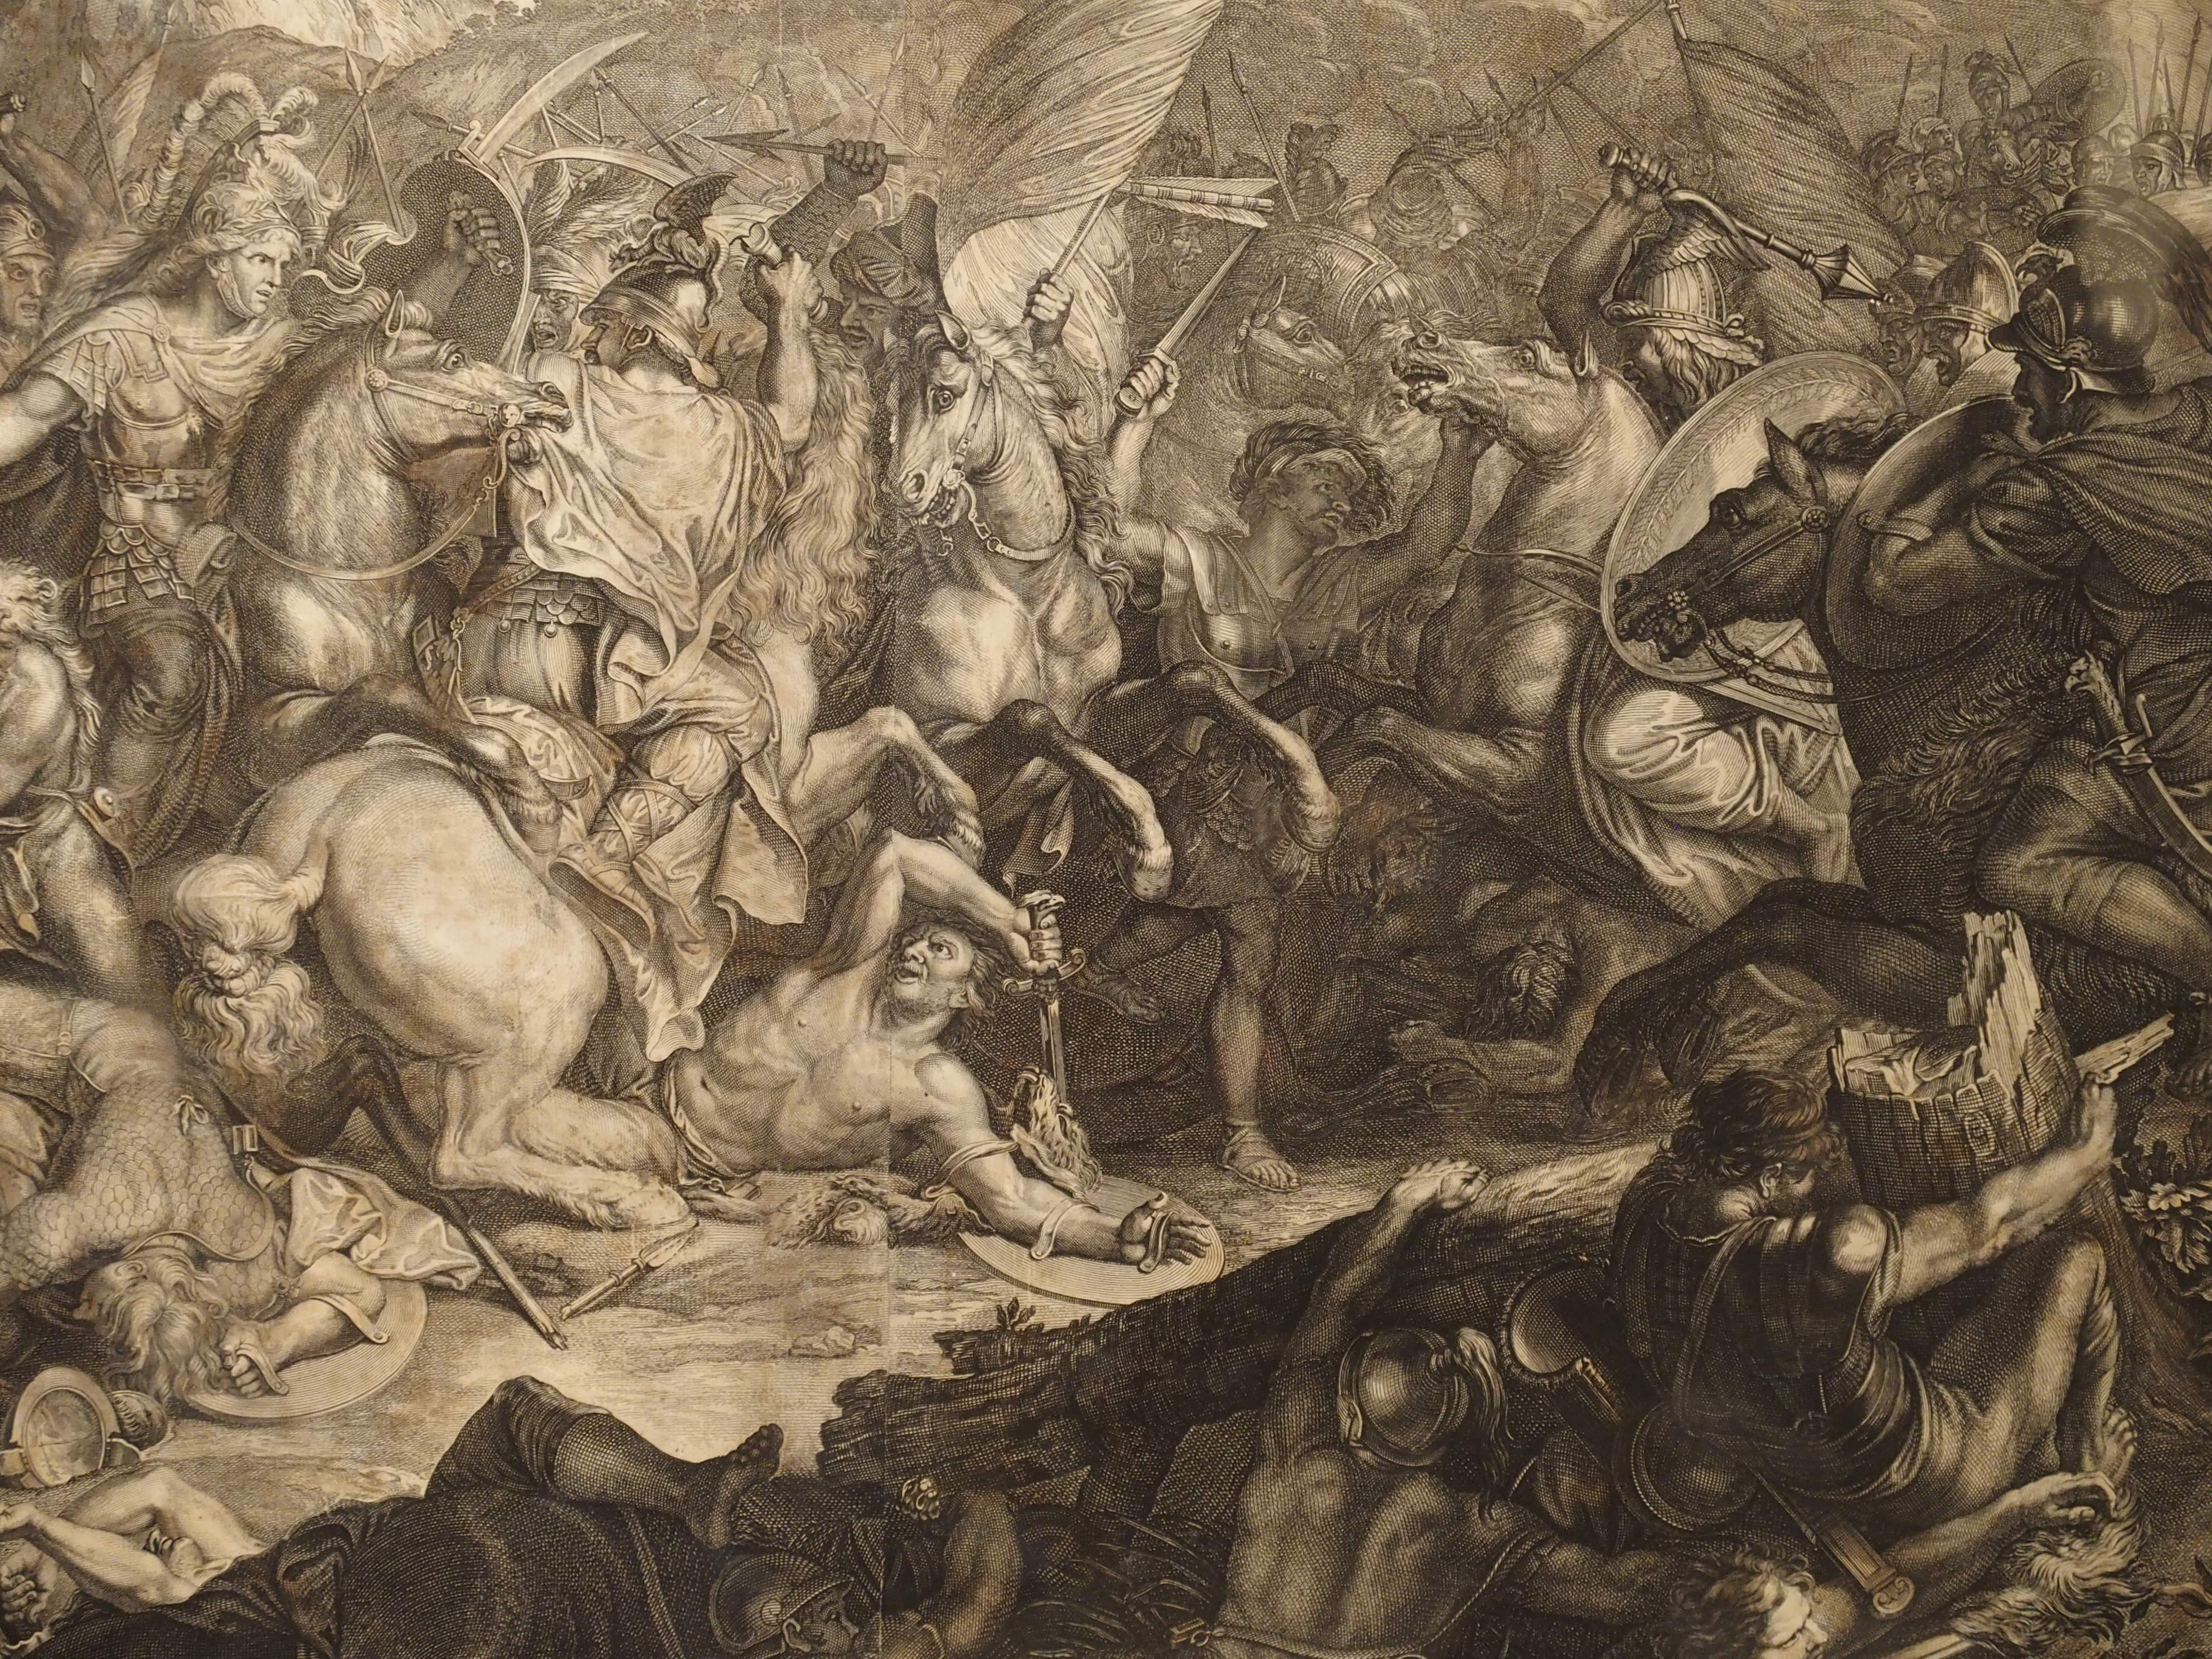 This incredibly detailed set of antique engravings date to circa 1700. The three framed scenes with glass covers depict the Battles of Alexander the Great. They are based on the monumental original paintings by Charles Le Brun, arguably the greatest